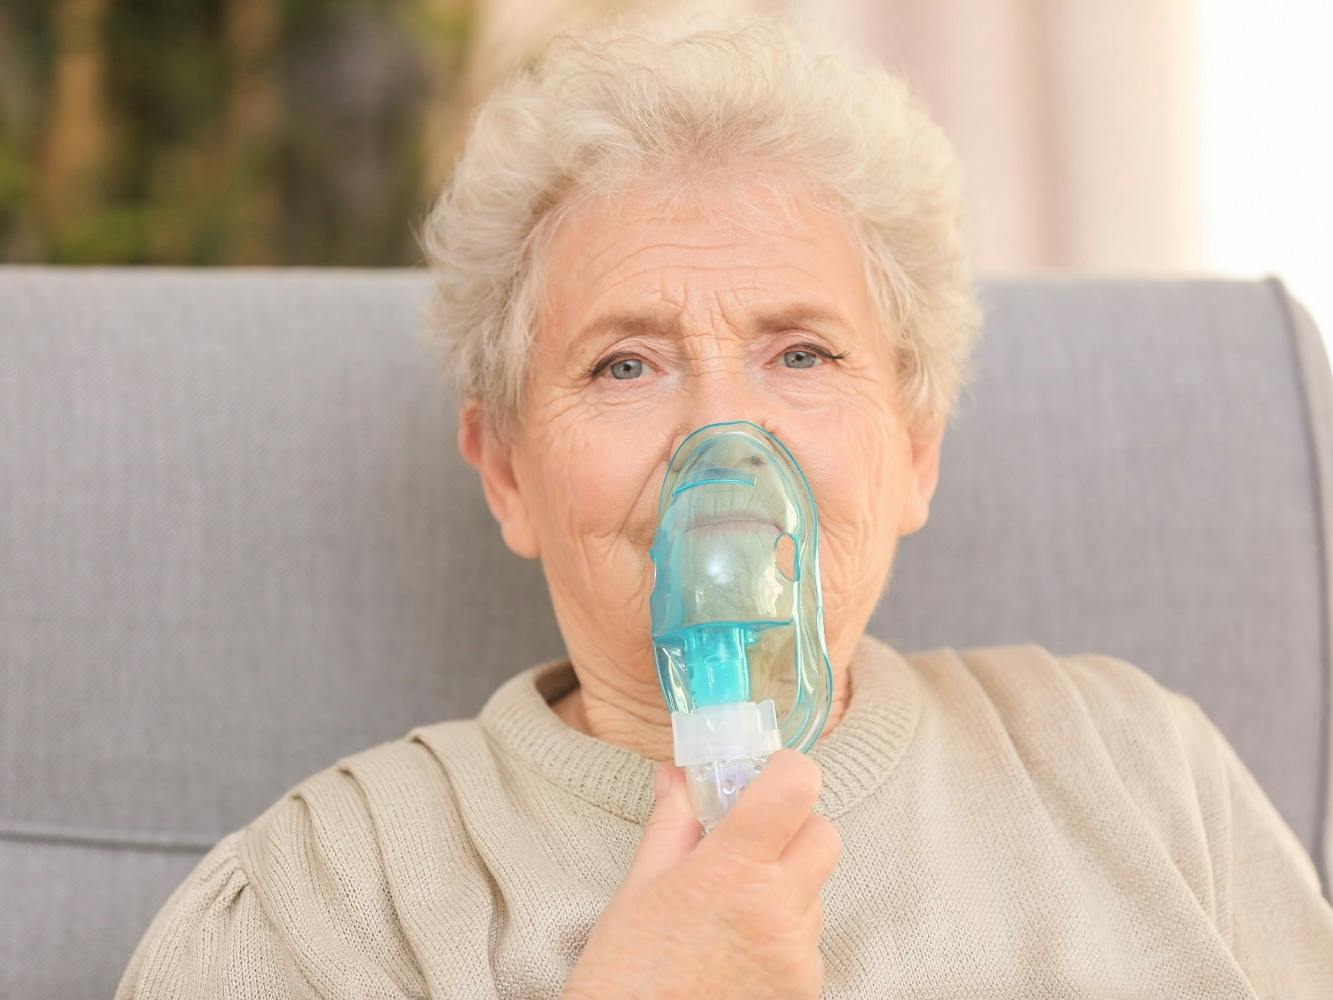 Does Medicare Cover Nebulizers?